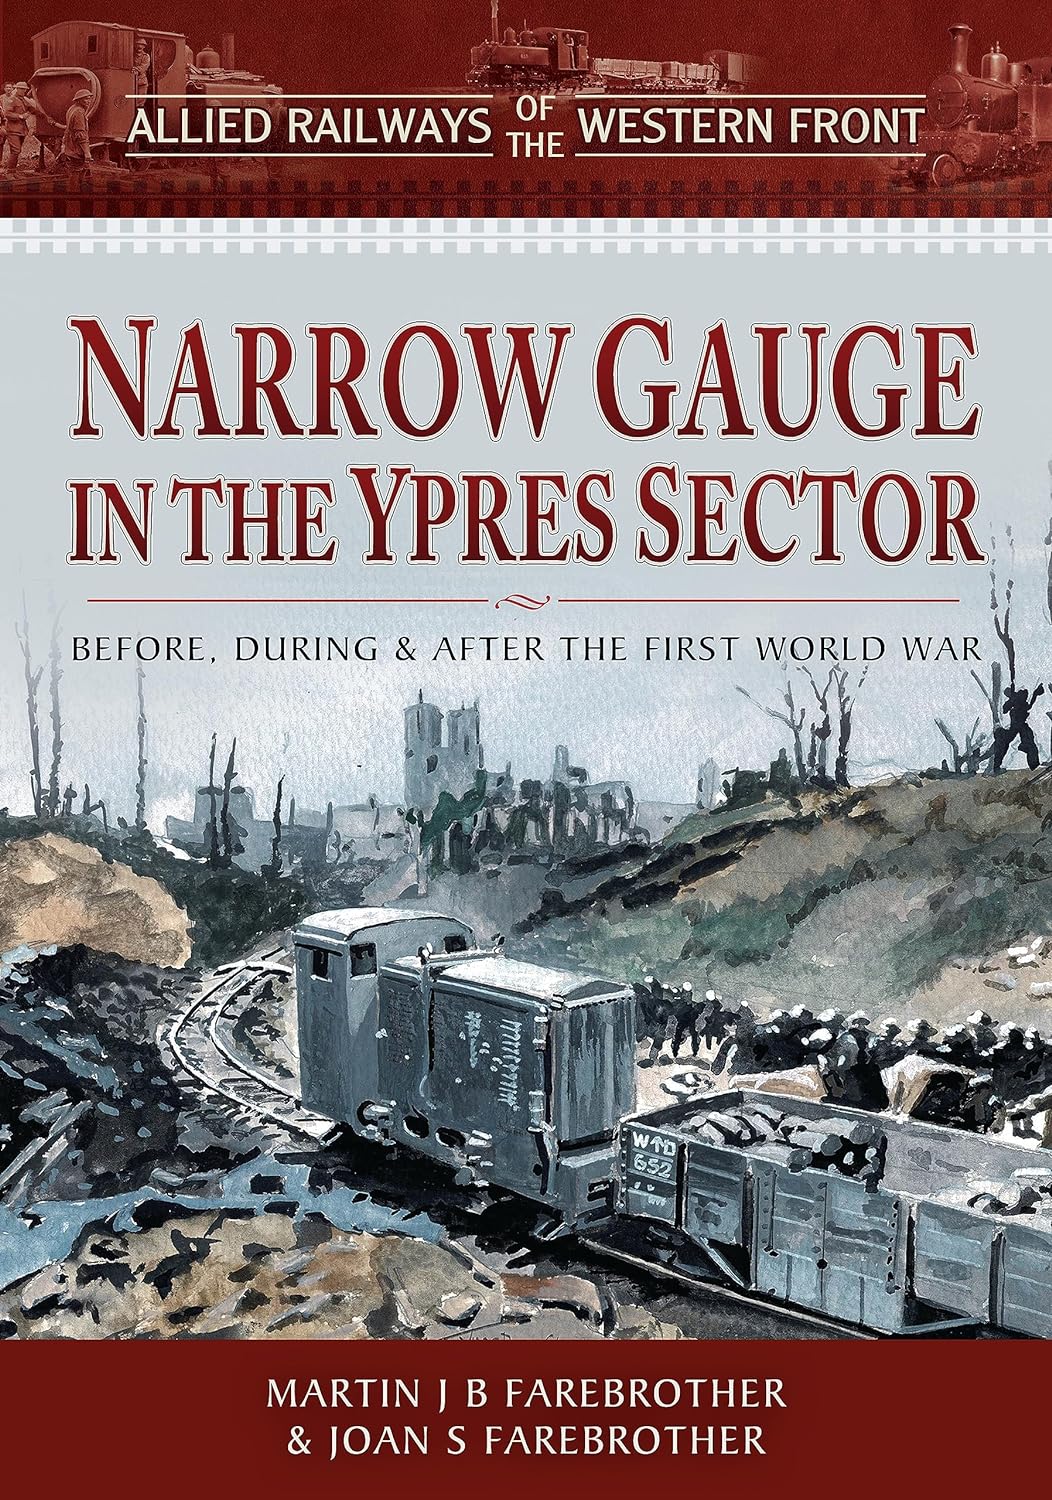 Allied Railways of the Western Front - Narrow Gauge in the Ypres Sector - Before, During and After the First World War